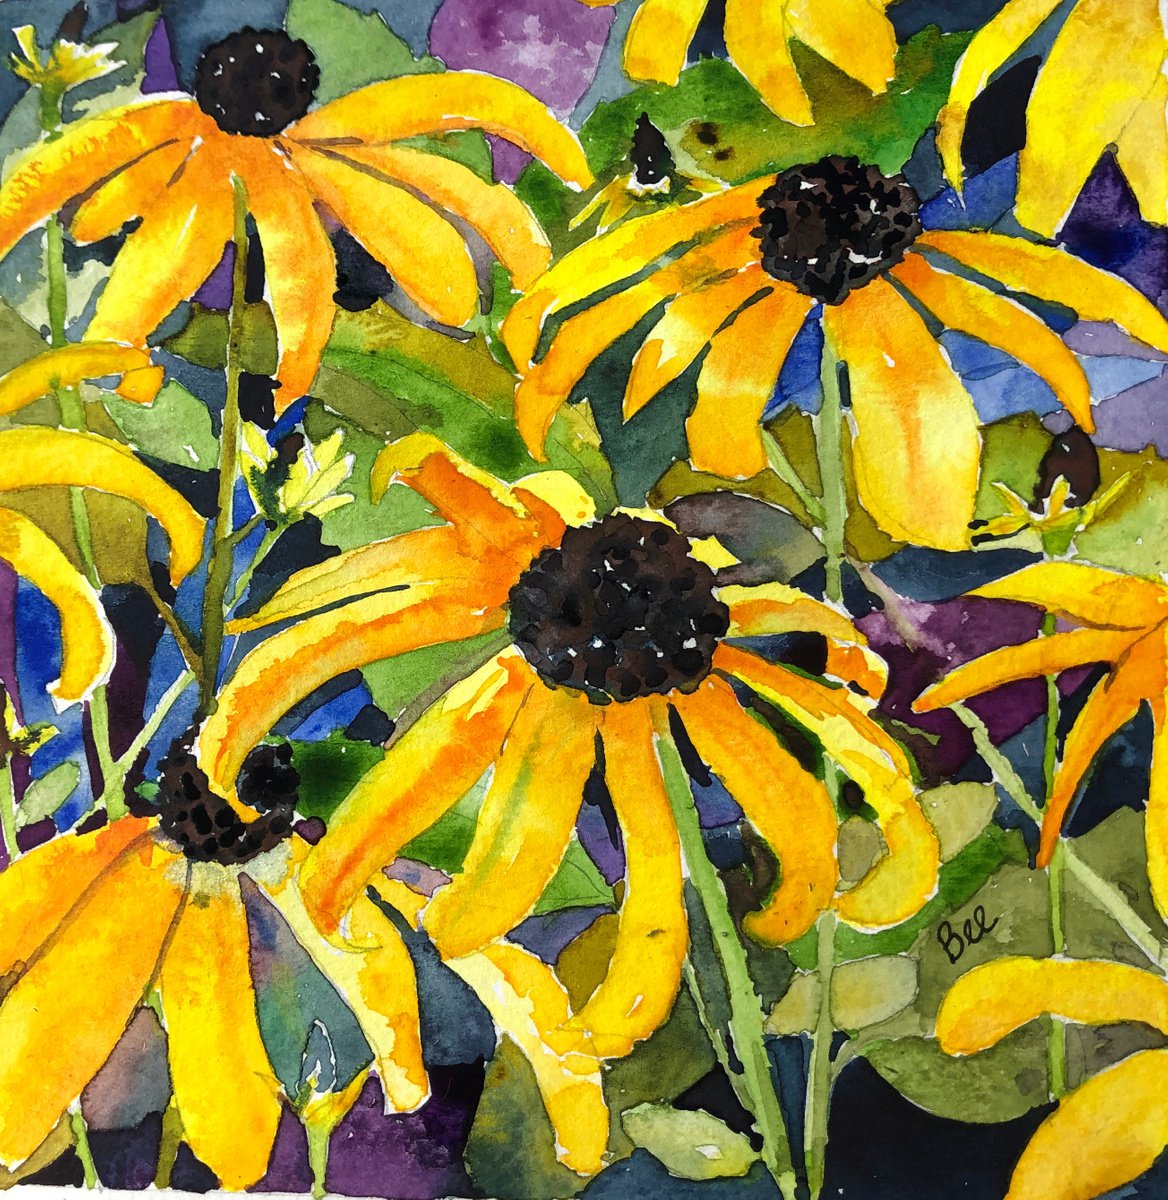 Black eyed susan by Bee Inch